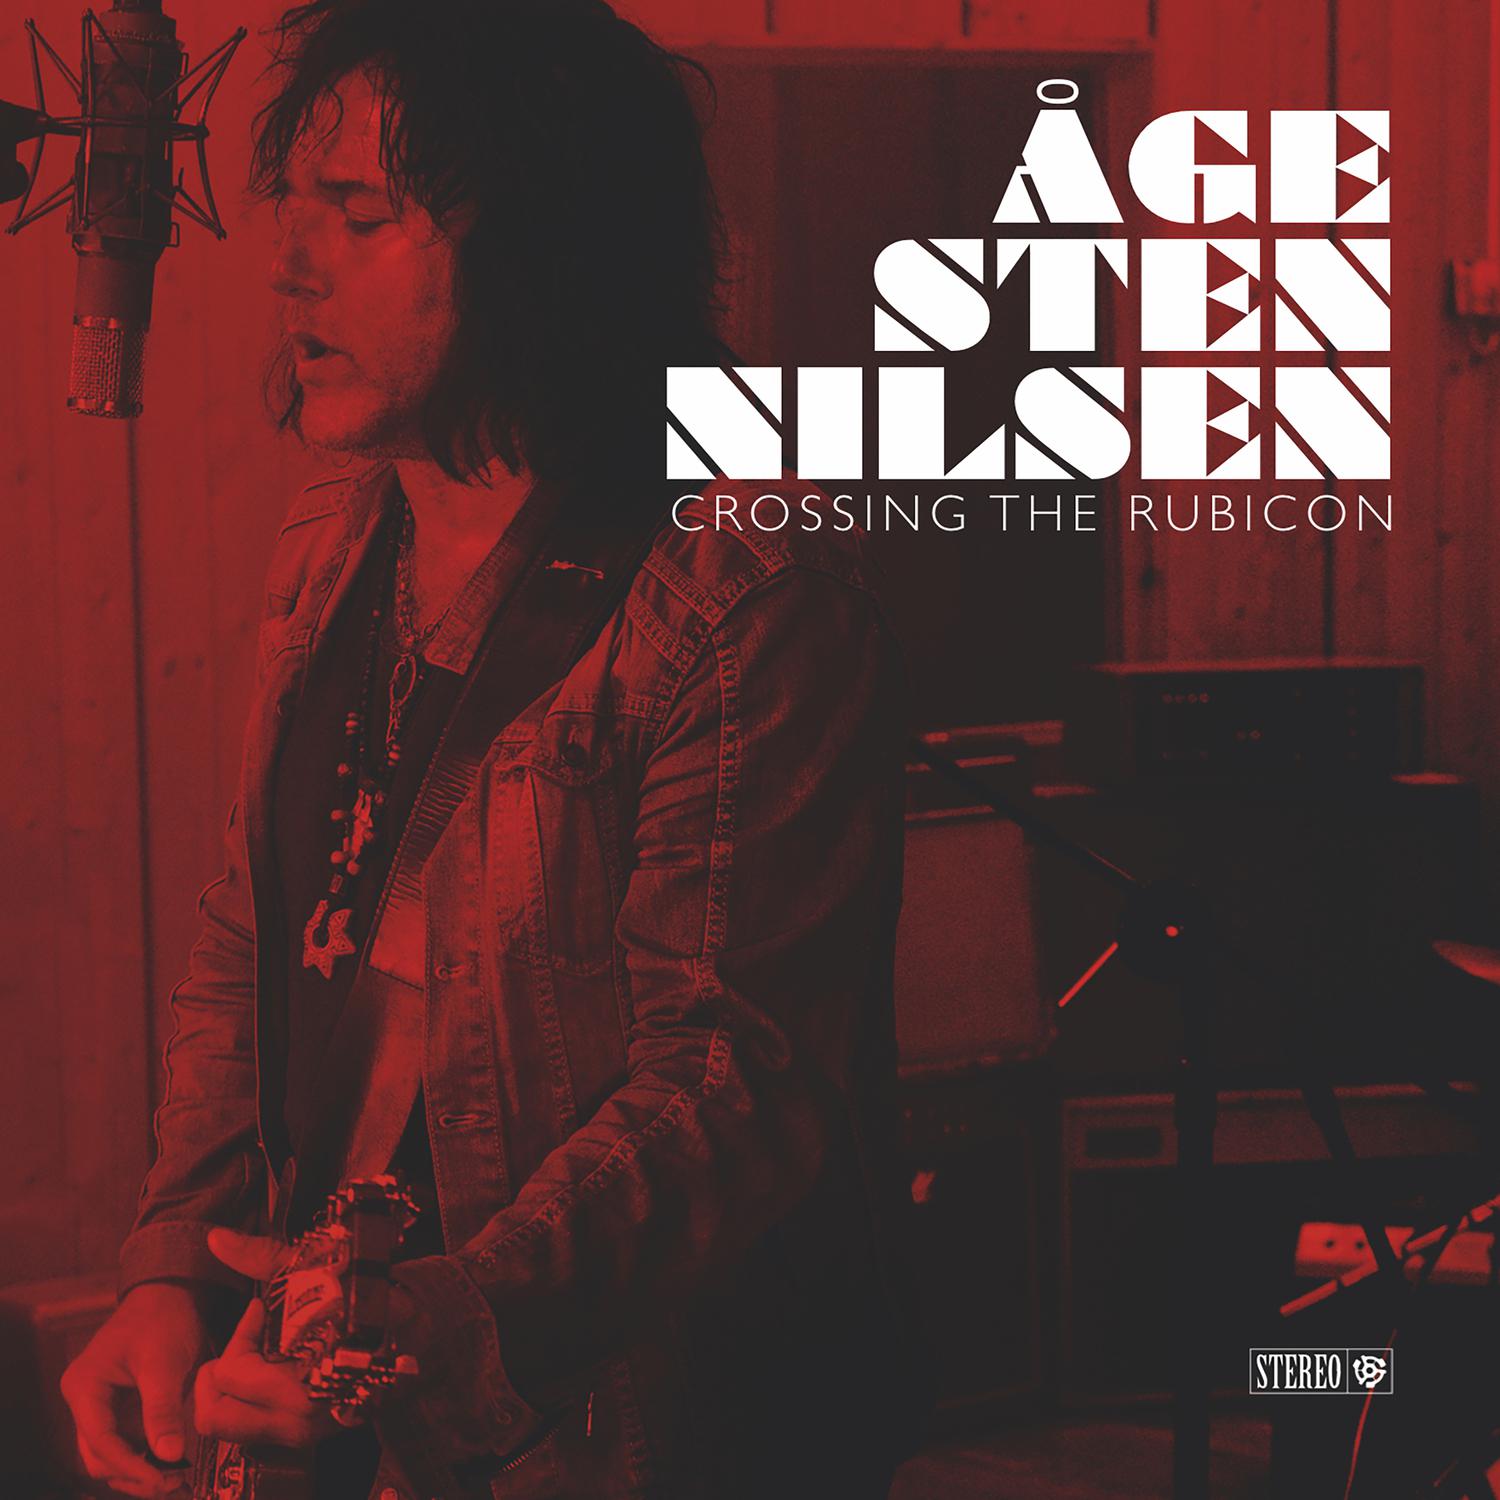 Age Sten Nilsen - One of You Own